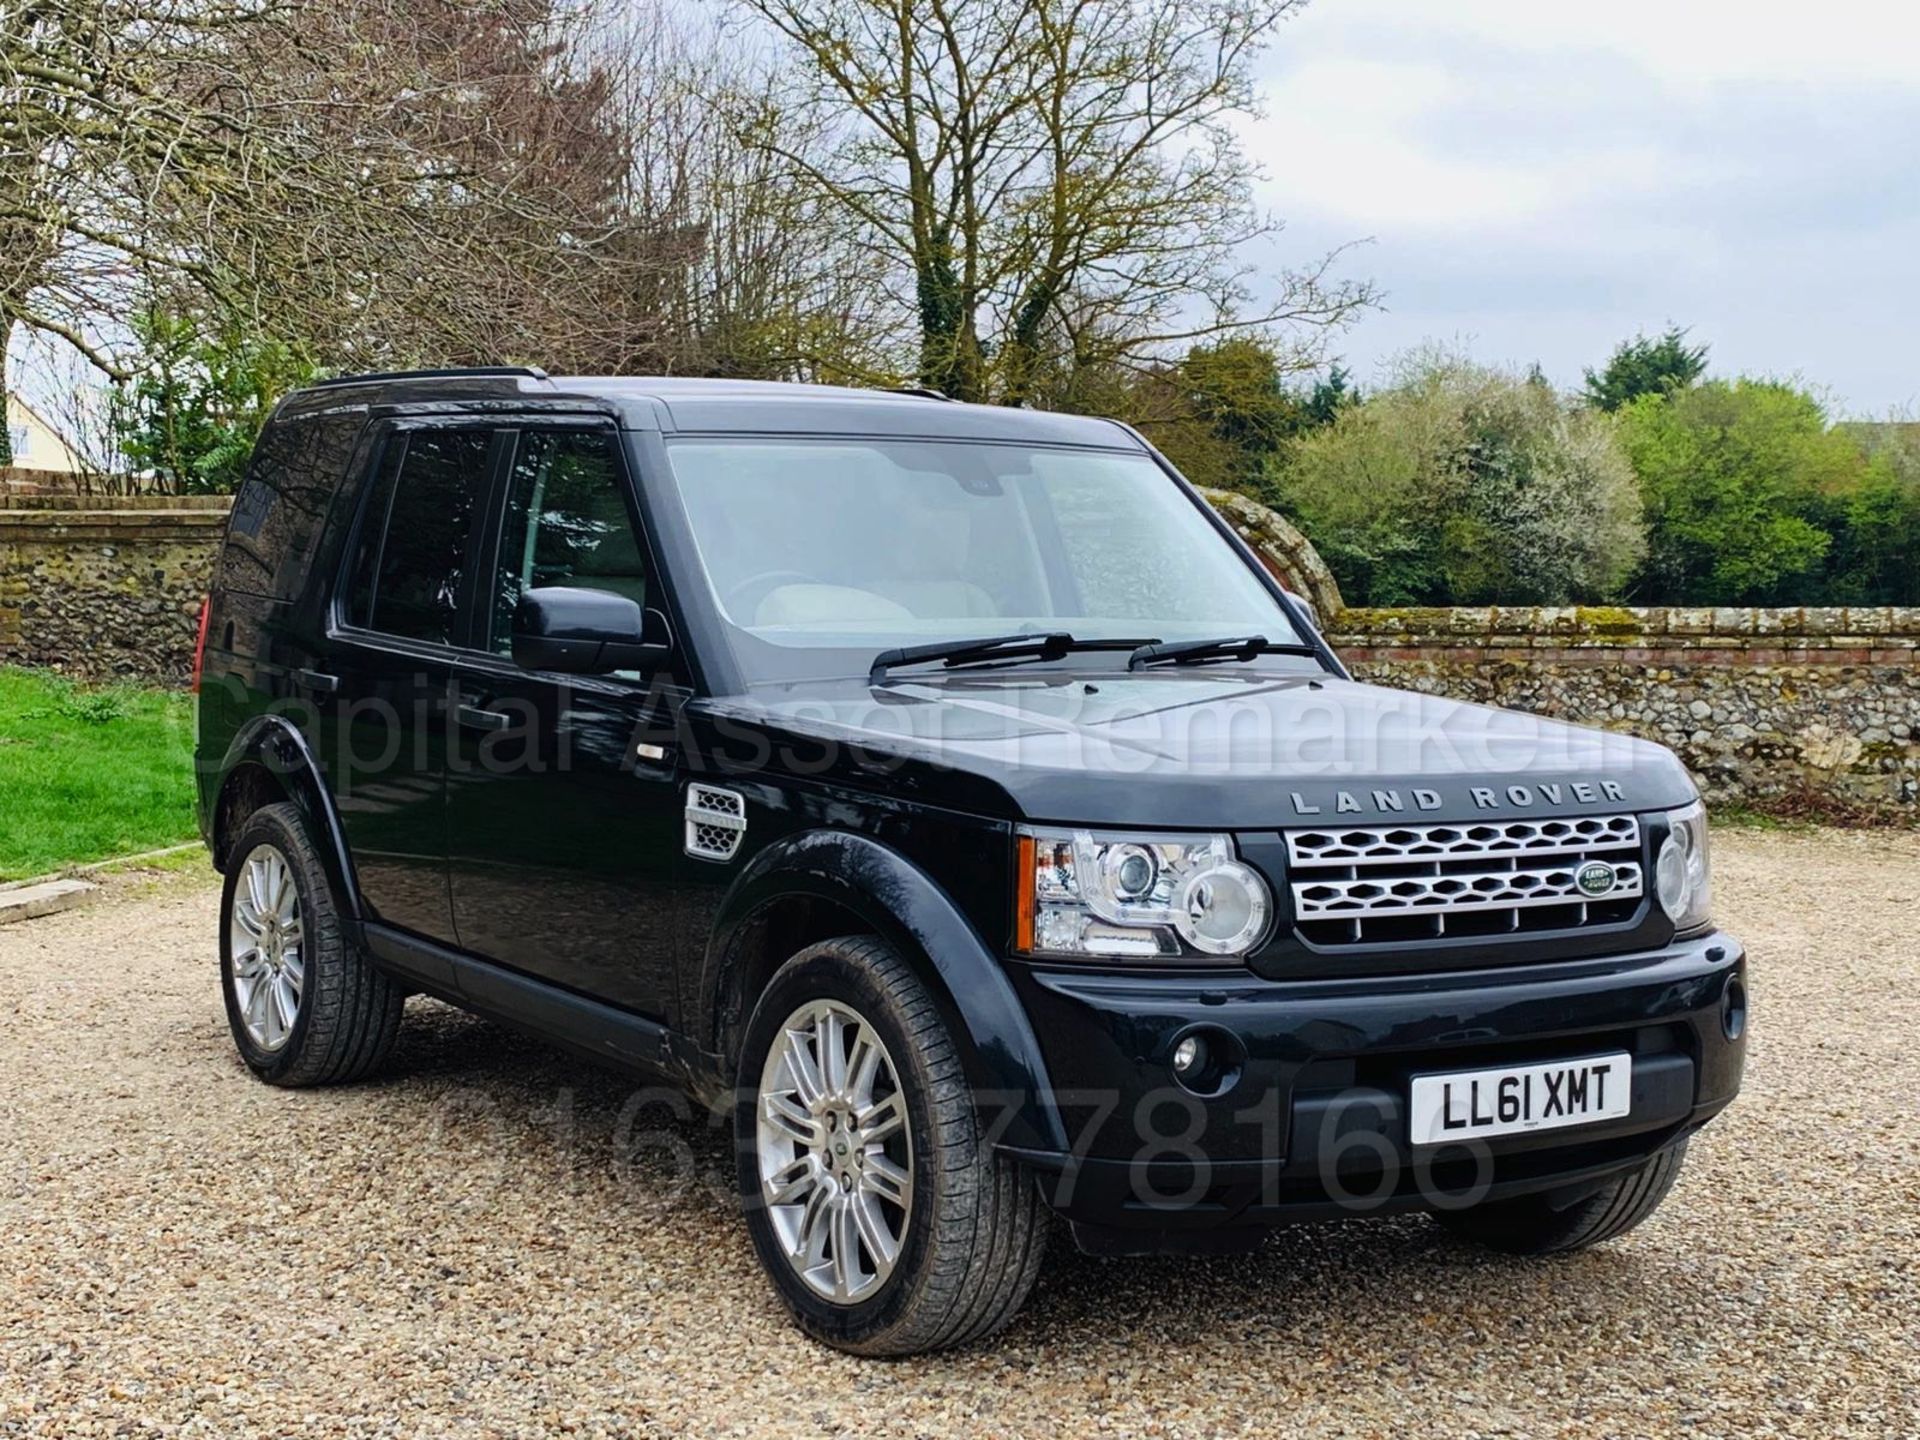 LAND ROVER DISCOVERY *HSE EDITION* 7 SEATER SUV (2012 MODEL) '3.0 SDV6- 8 SPEED AUTO' **HUGE SPEC**